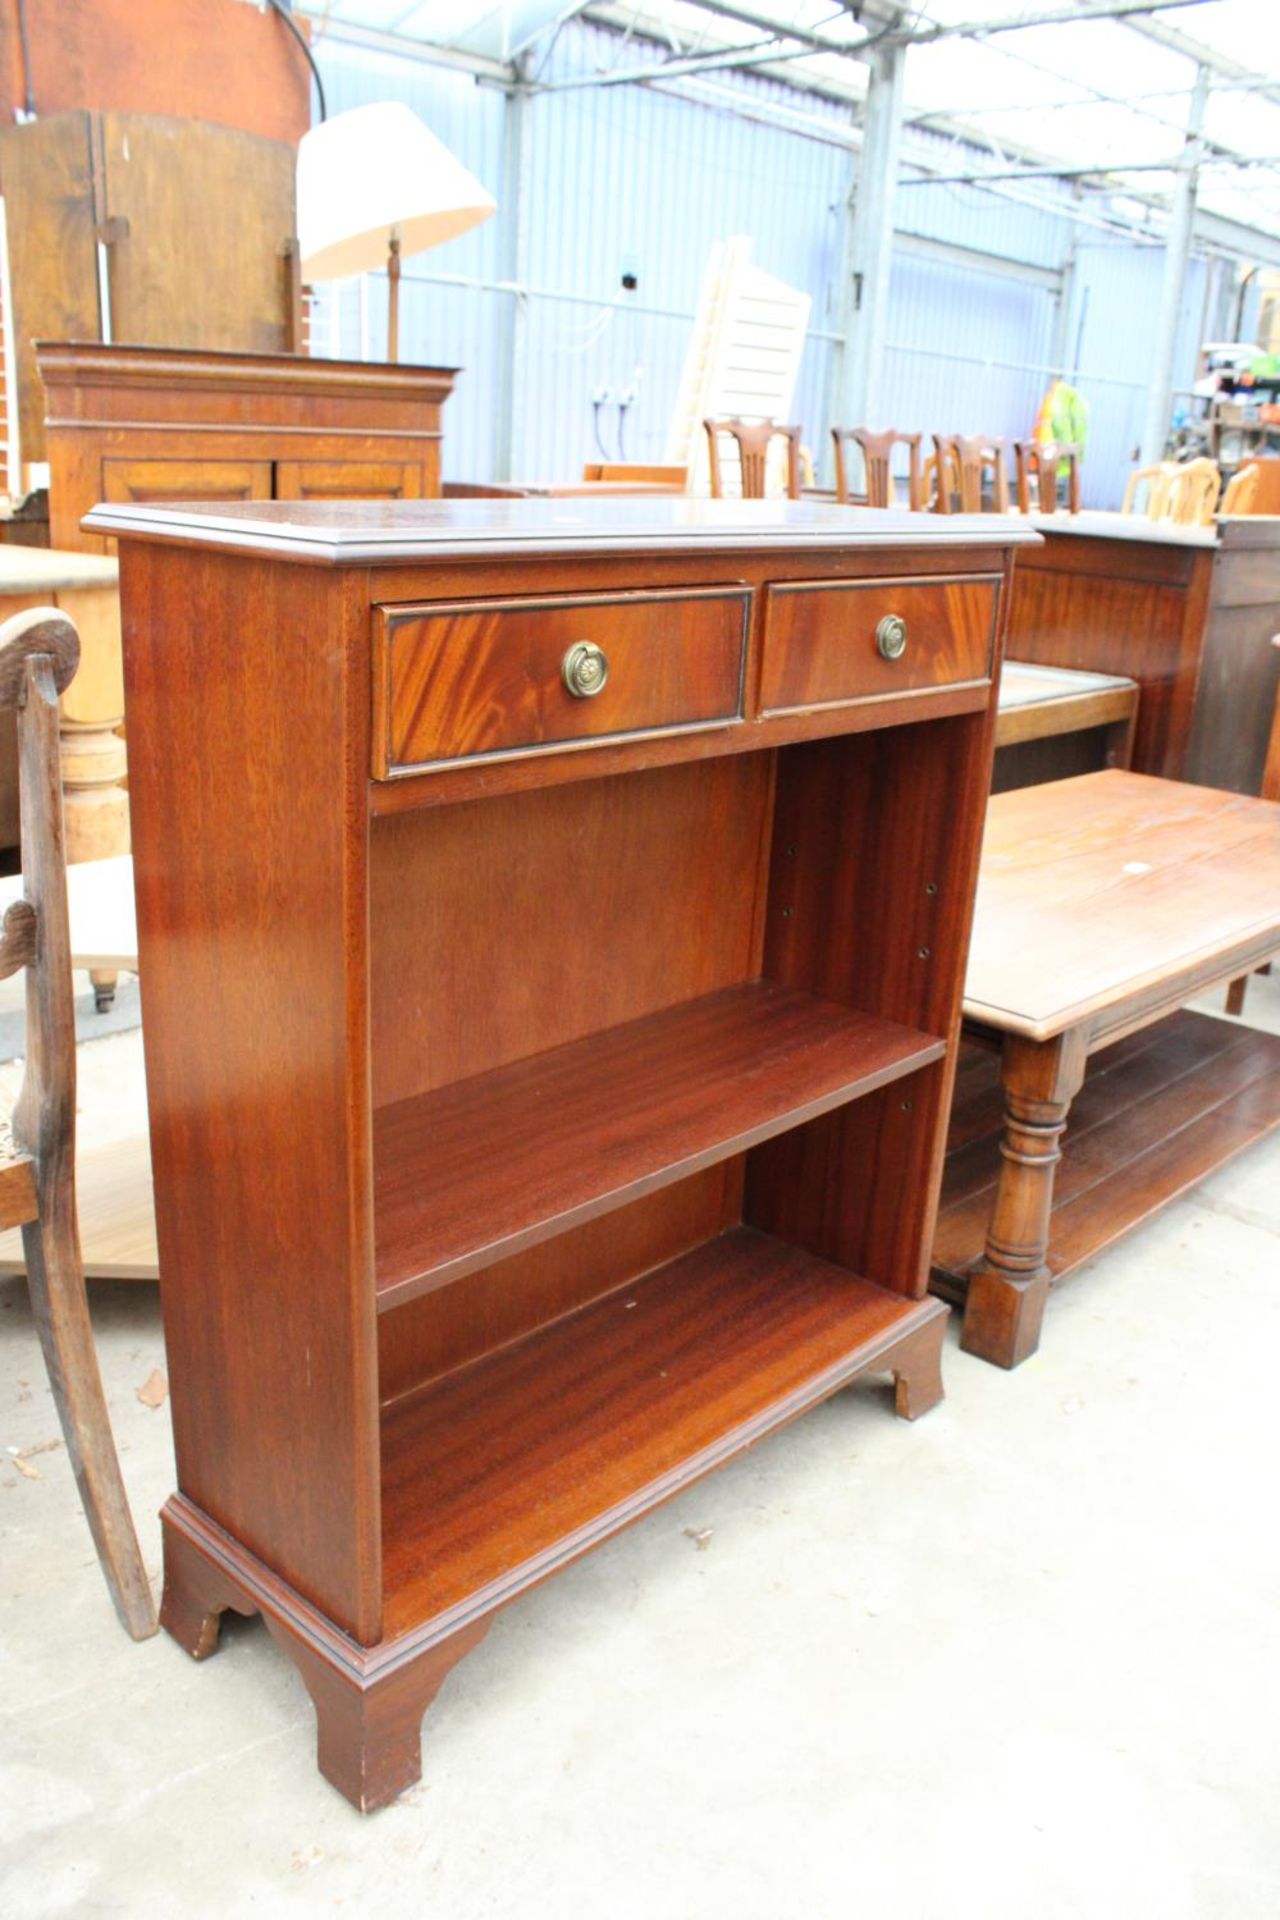 A REPRODUCTION MAHOGANY J.SYDNEY SMITH TWO TIER OPEN BOOKCASE WITH TWO FRIEZE DRAWERS - Image 2 of 2